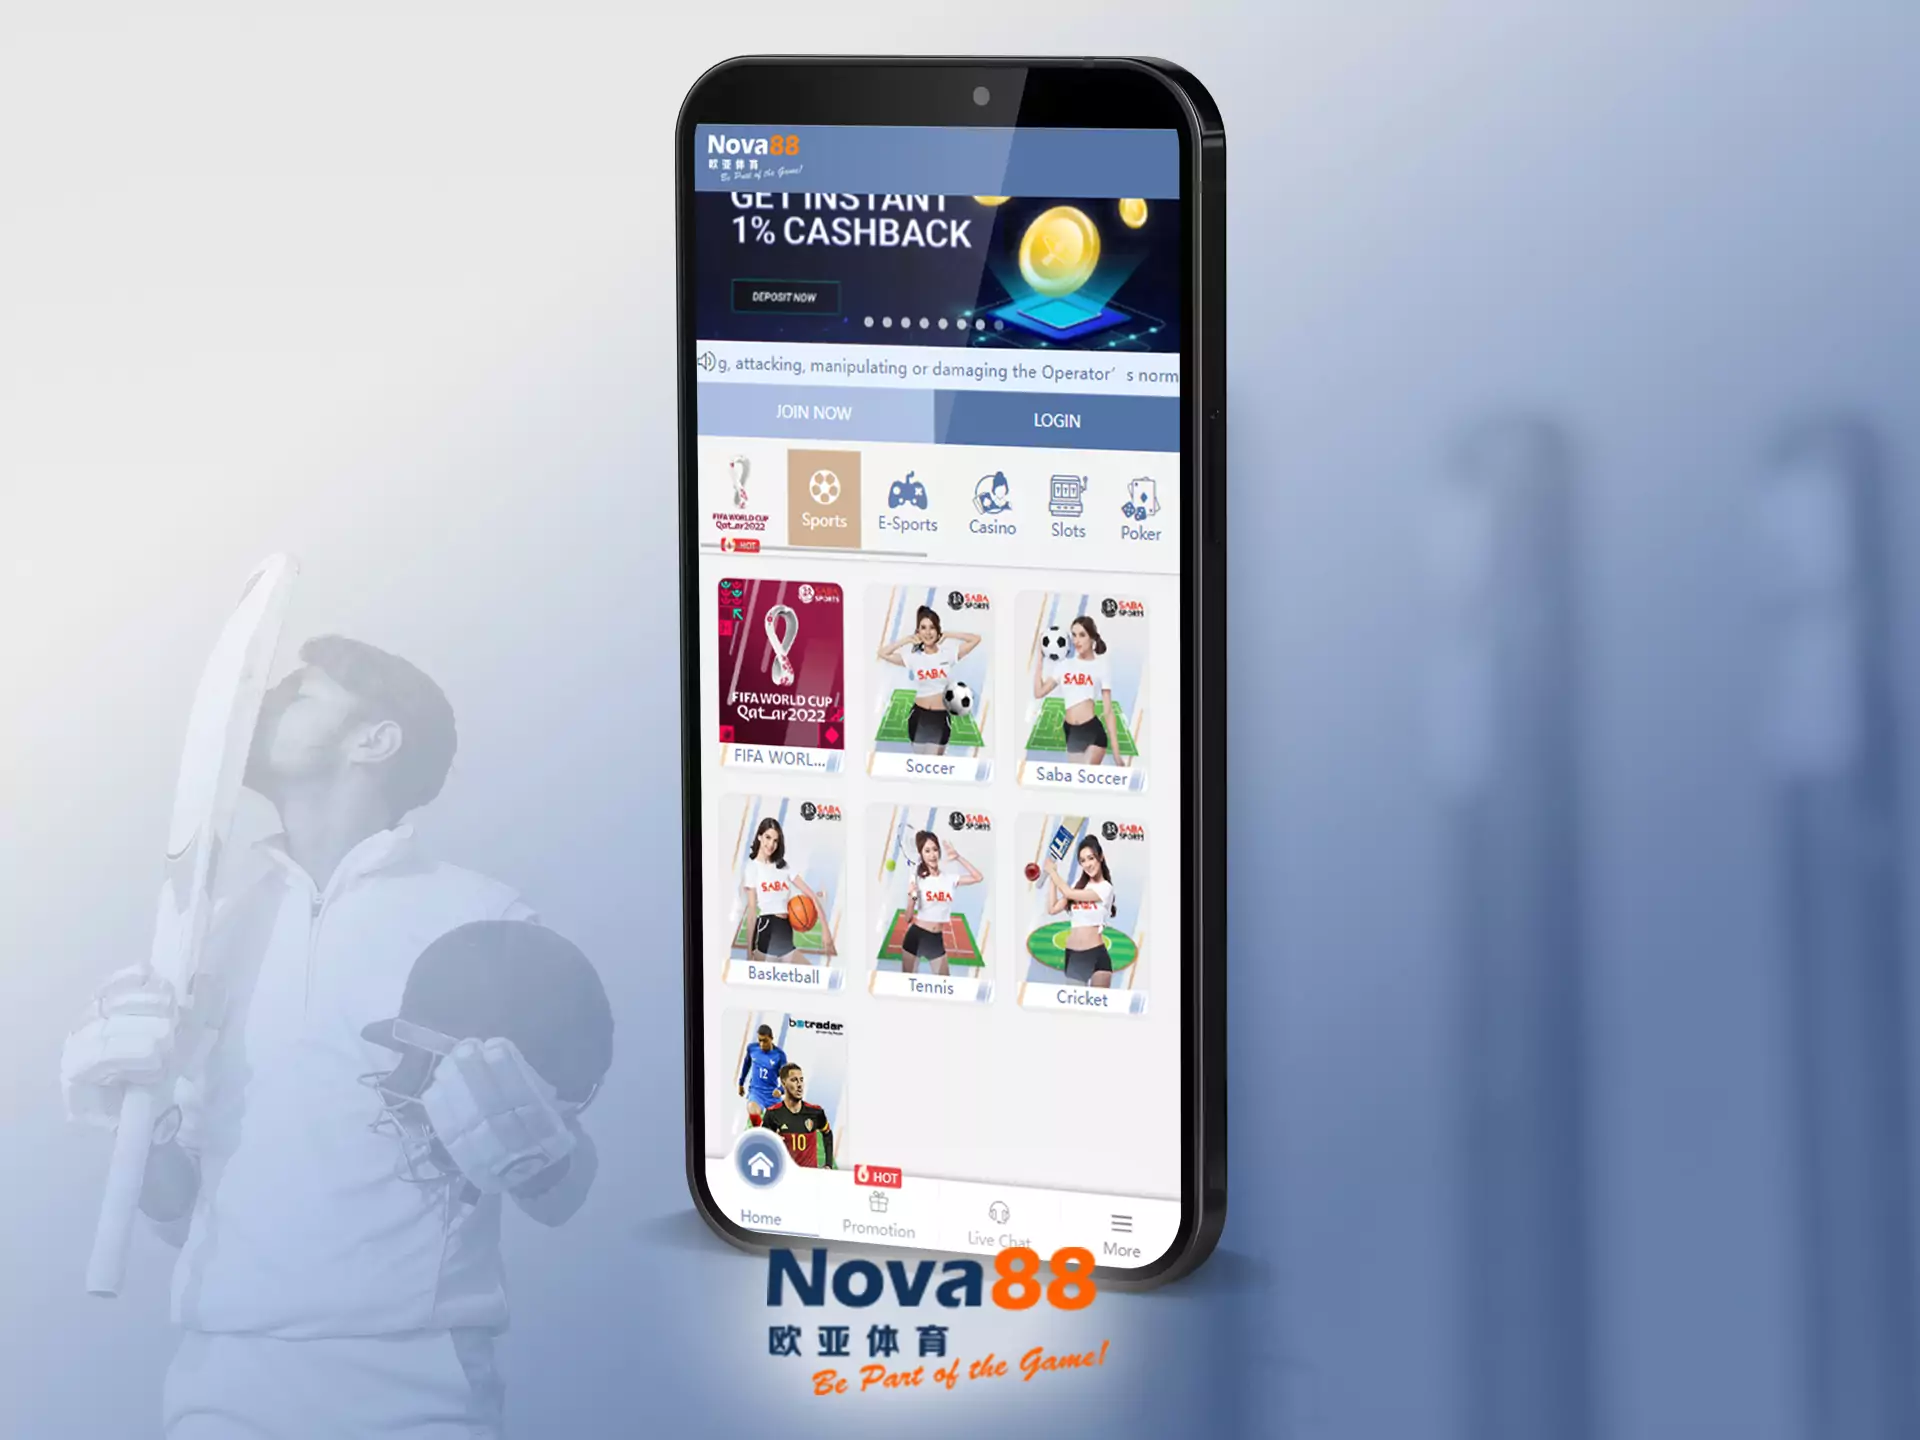 Smartphone users can play and bet on the Nova88 mobile site.